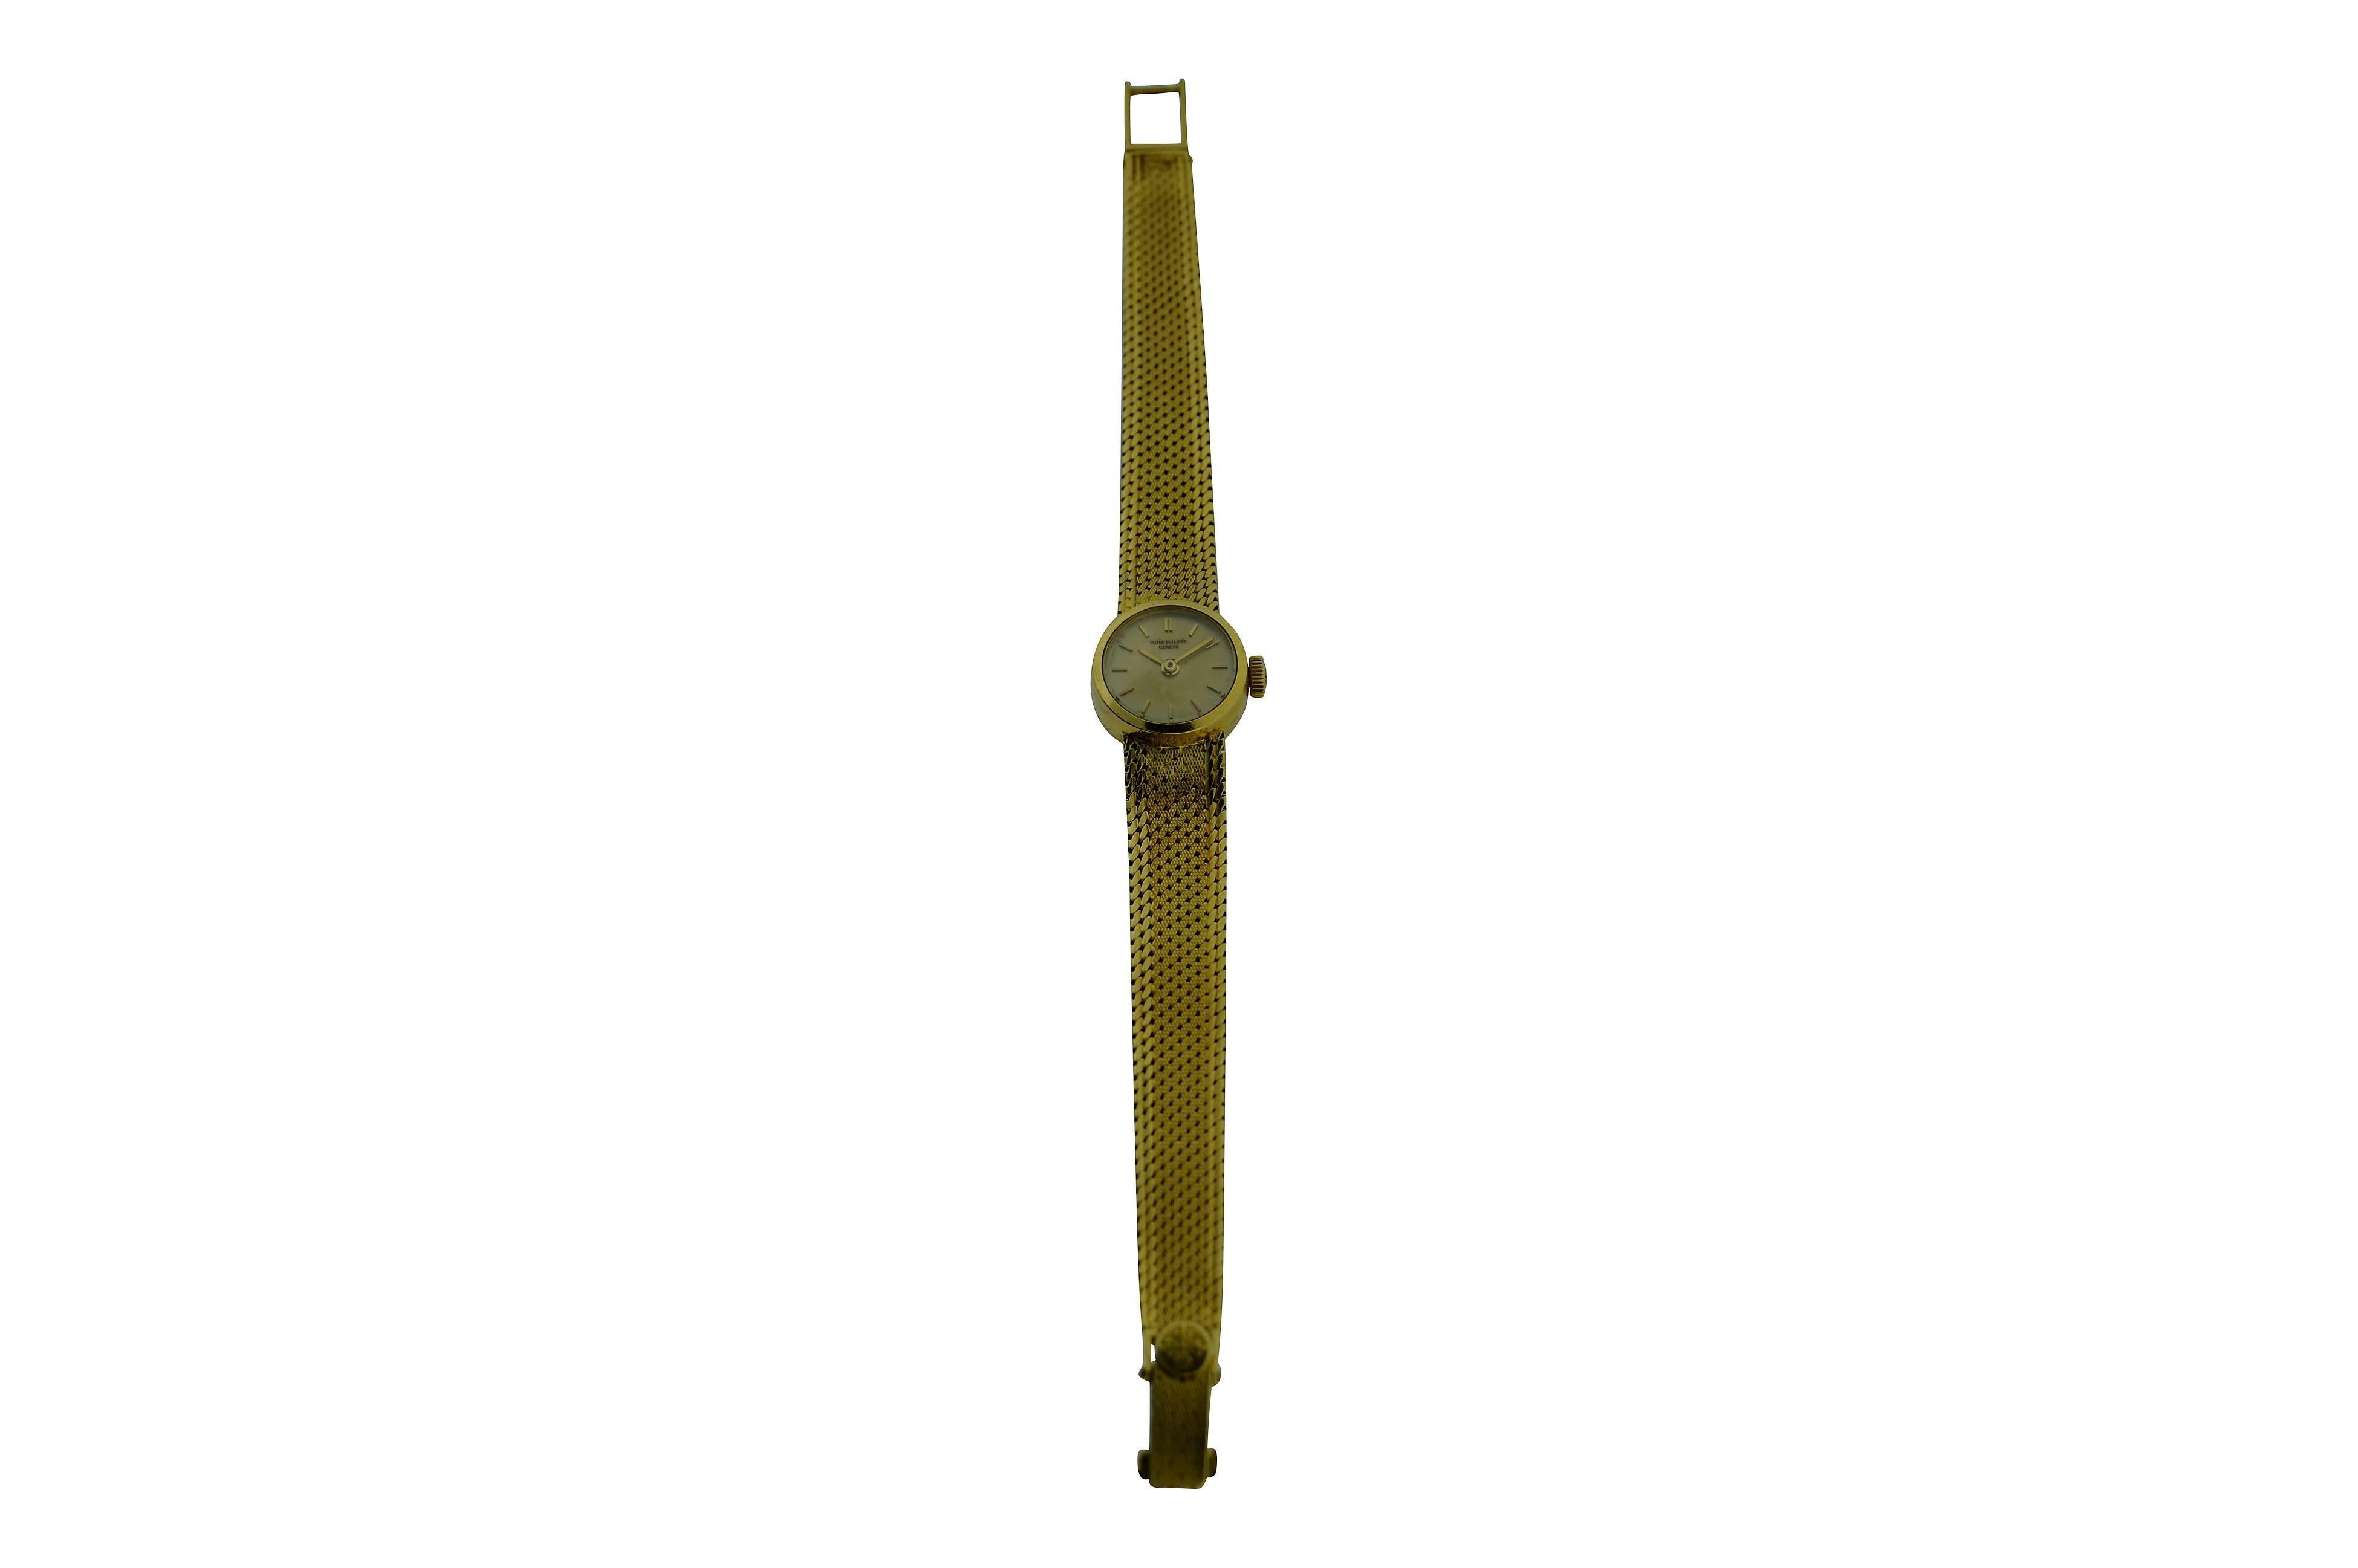 FACTORY / HOUSE: Patek Philippe Wrist Watch
STYLE / REFERENCE: 3266/ 13
MOVEMENT / CALIBER: Round / 20 Jewels
METAL: 18Kt. Yellow Gold
CIRCA: 1950s
DIAL / HANDS: Original Silvered with Batons / Baton Hands
DIMENSIONS: 15mm X 15mm
ATTACHMENT /